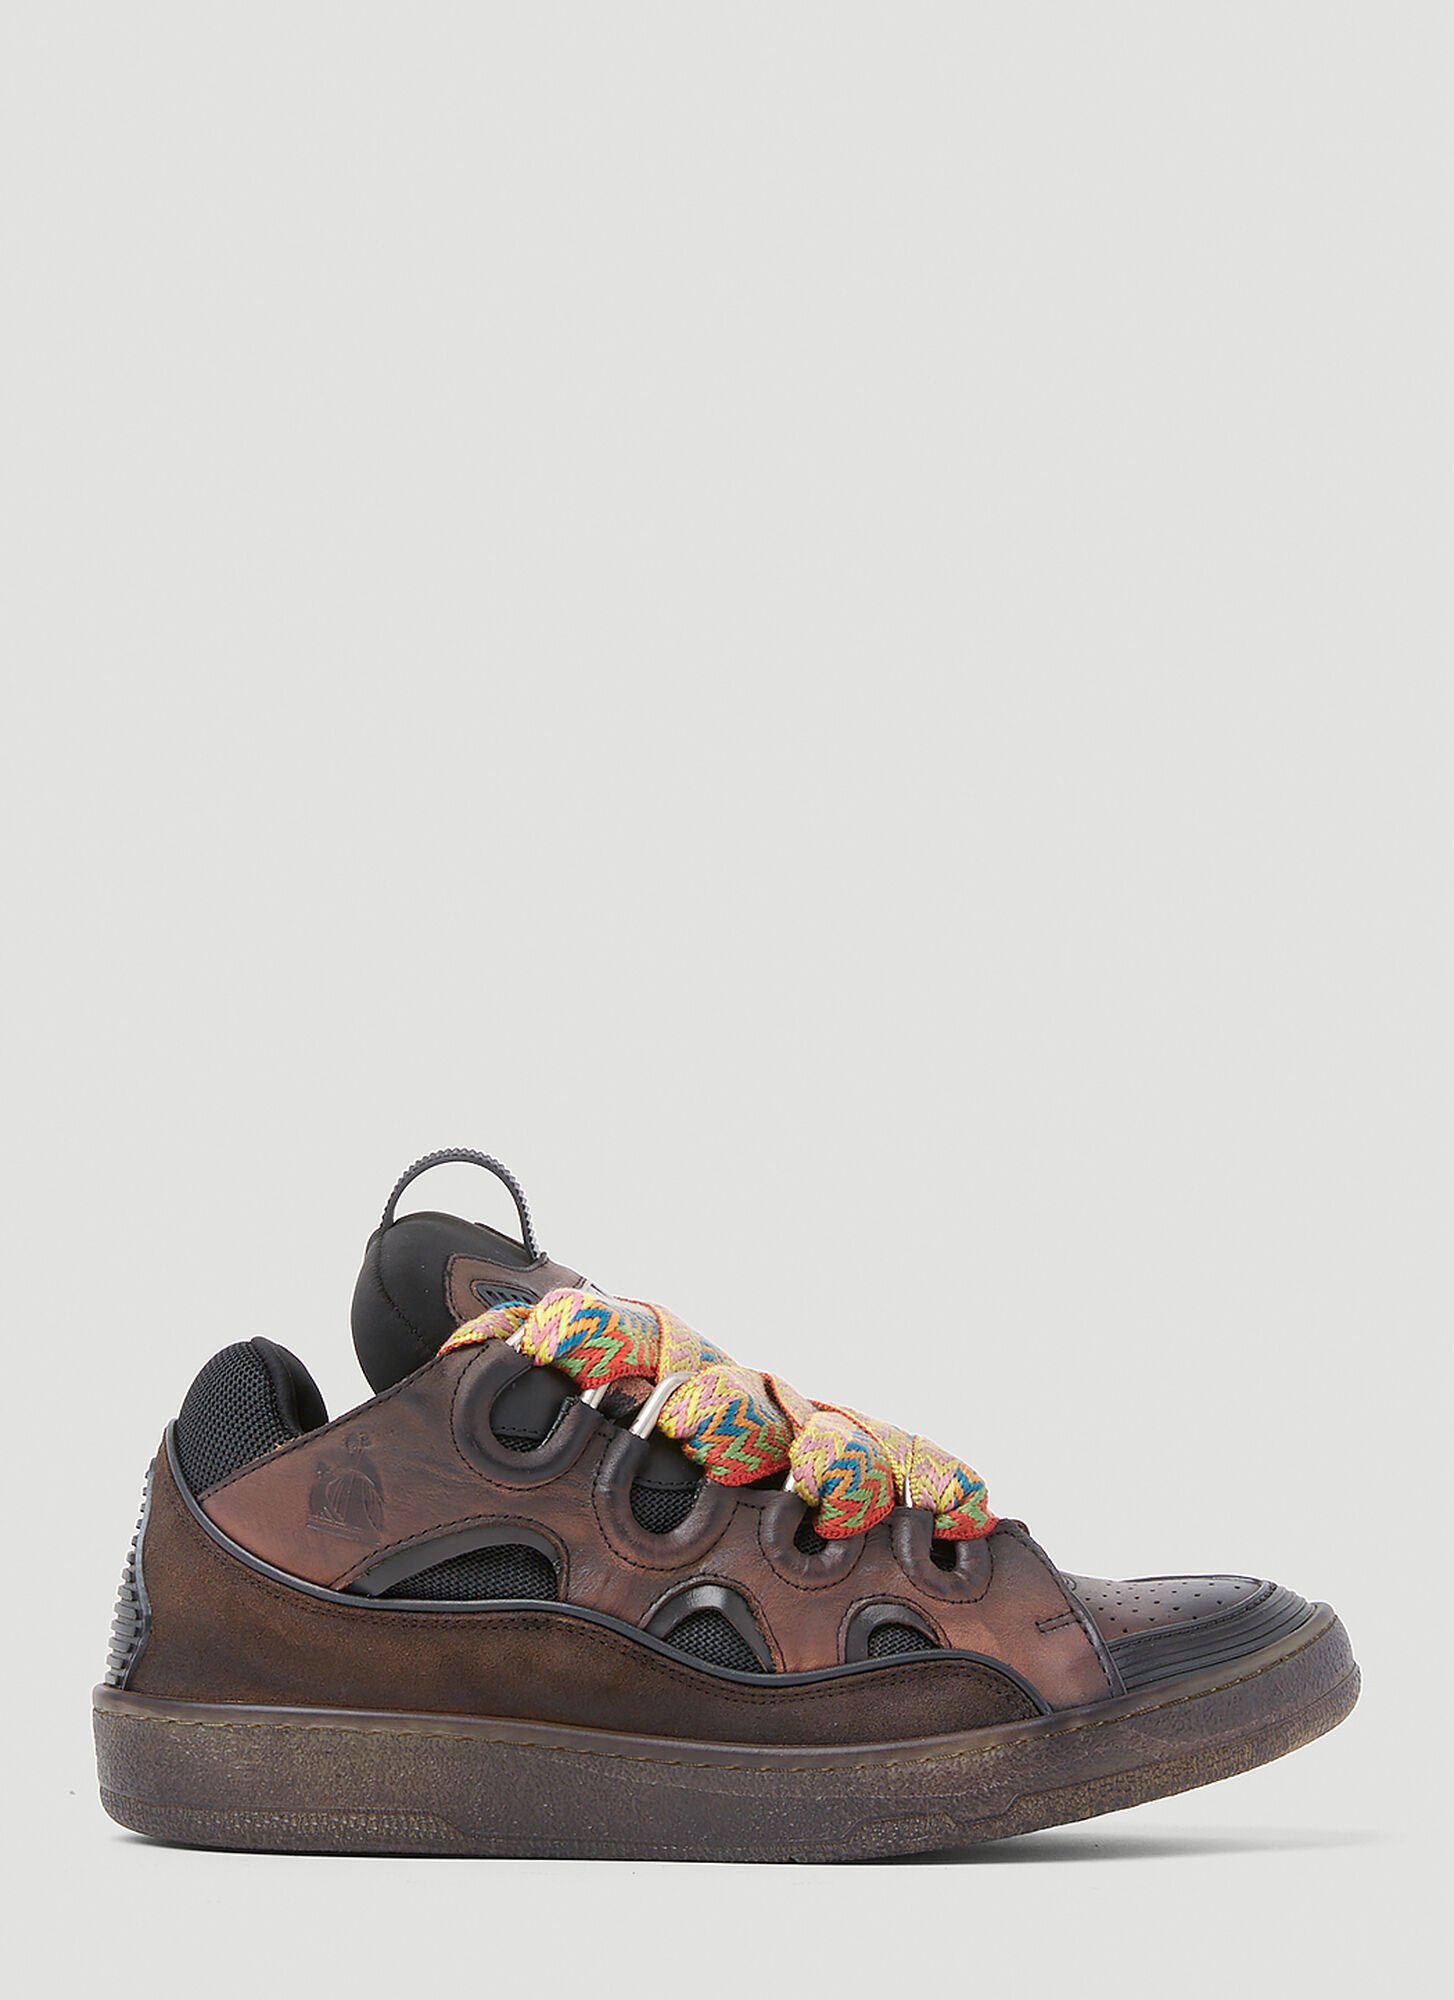 Lanvin Curb Leather And Glitter Sneakers In Brown